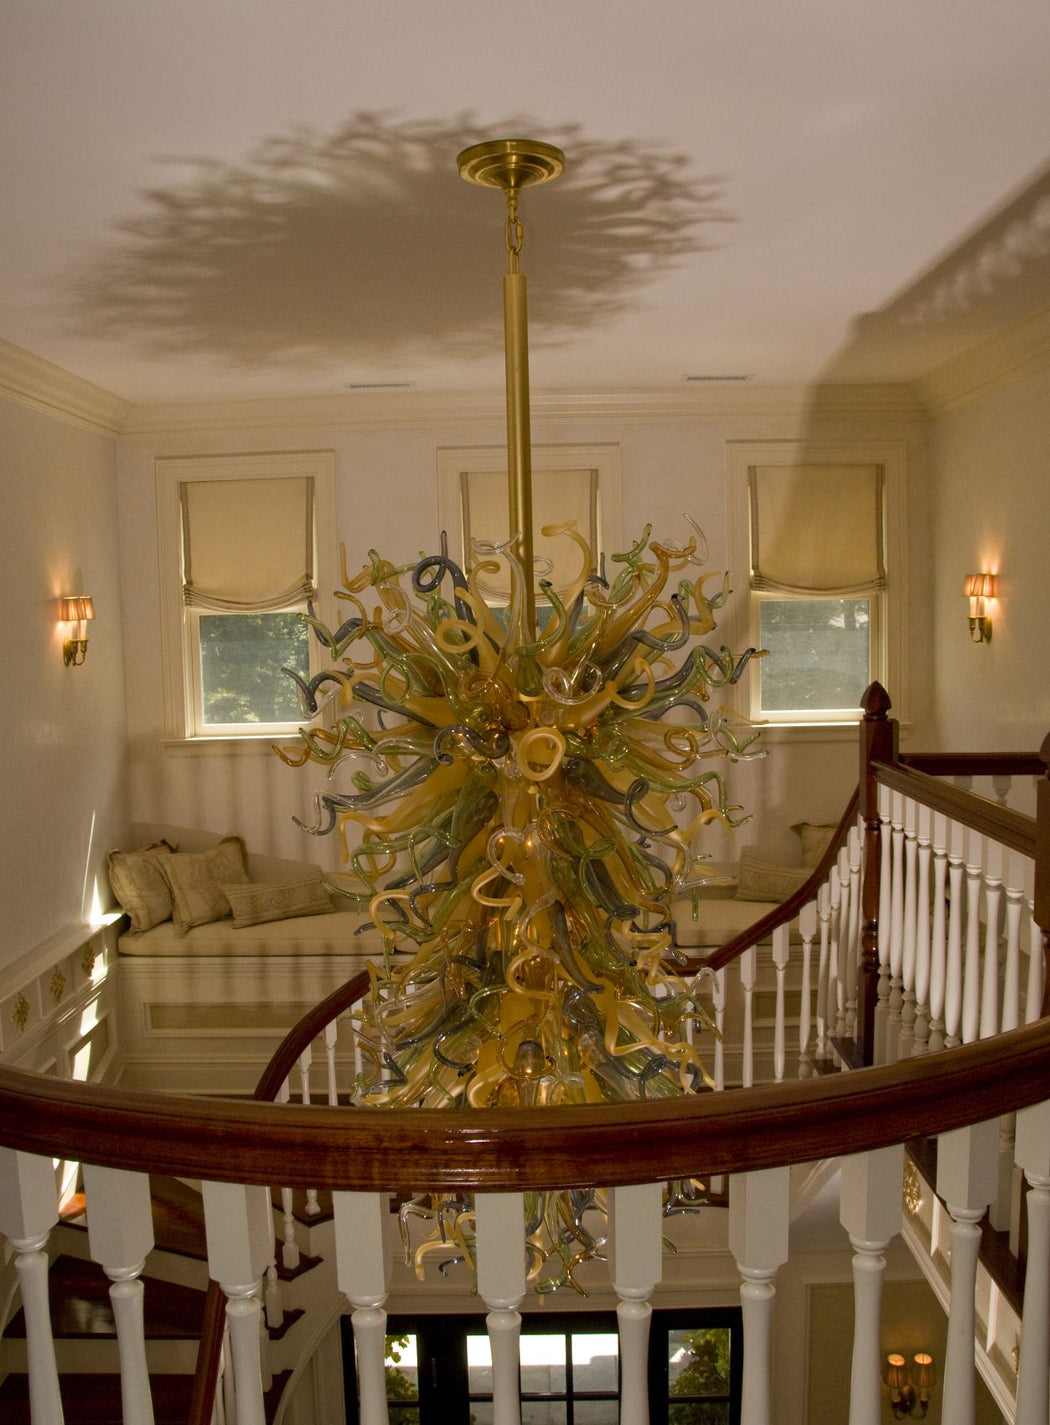 Custom-made glass art stairwell chandelier in your choice of colors